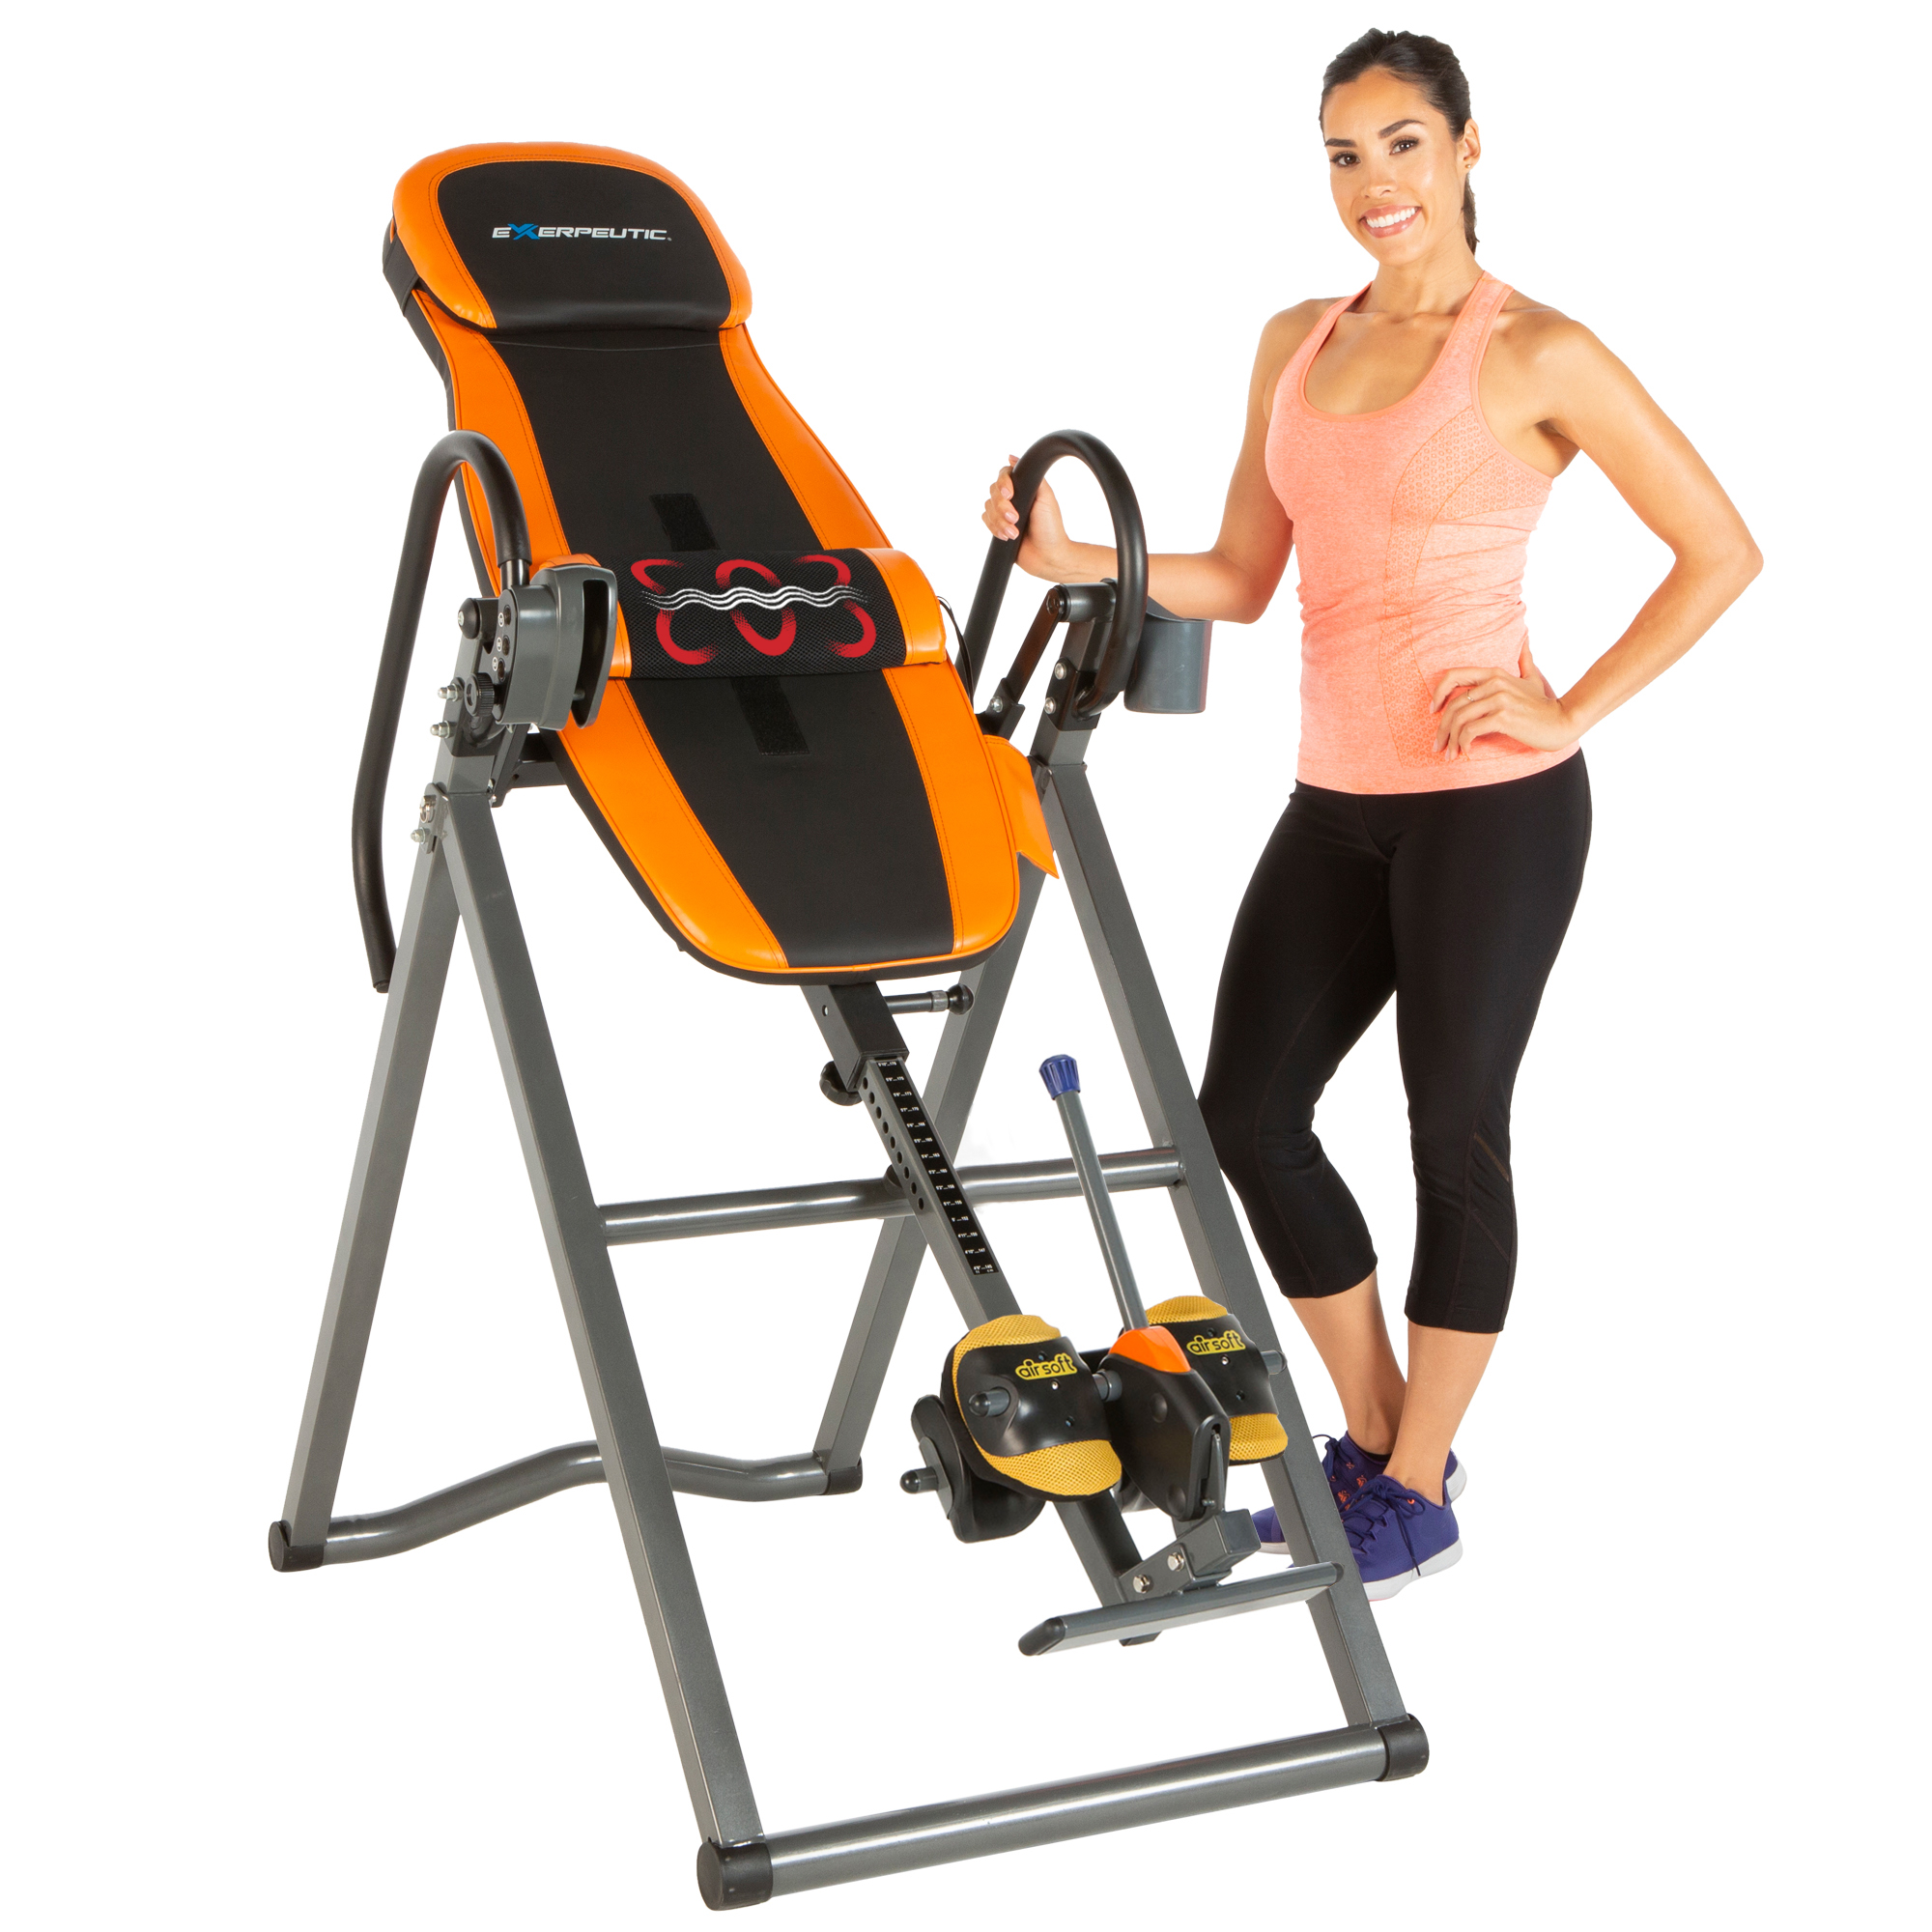 EXERPEUTIC 375SL UL Certified Heat and Massage Therapy Inversion Table with AIRSOFT Technology